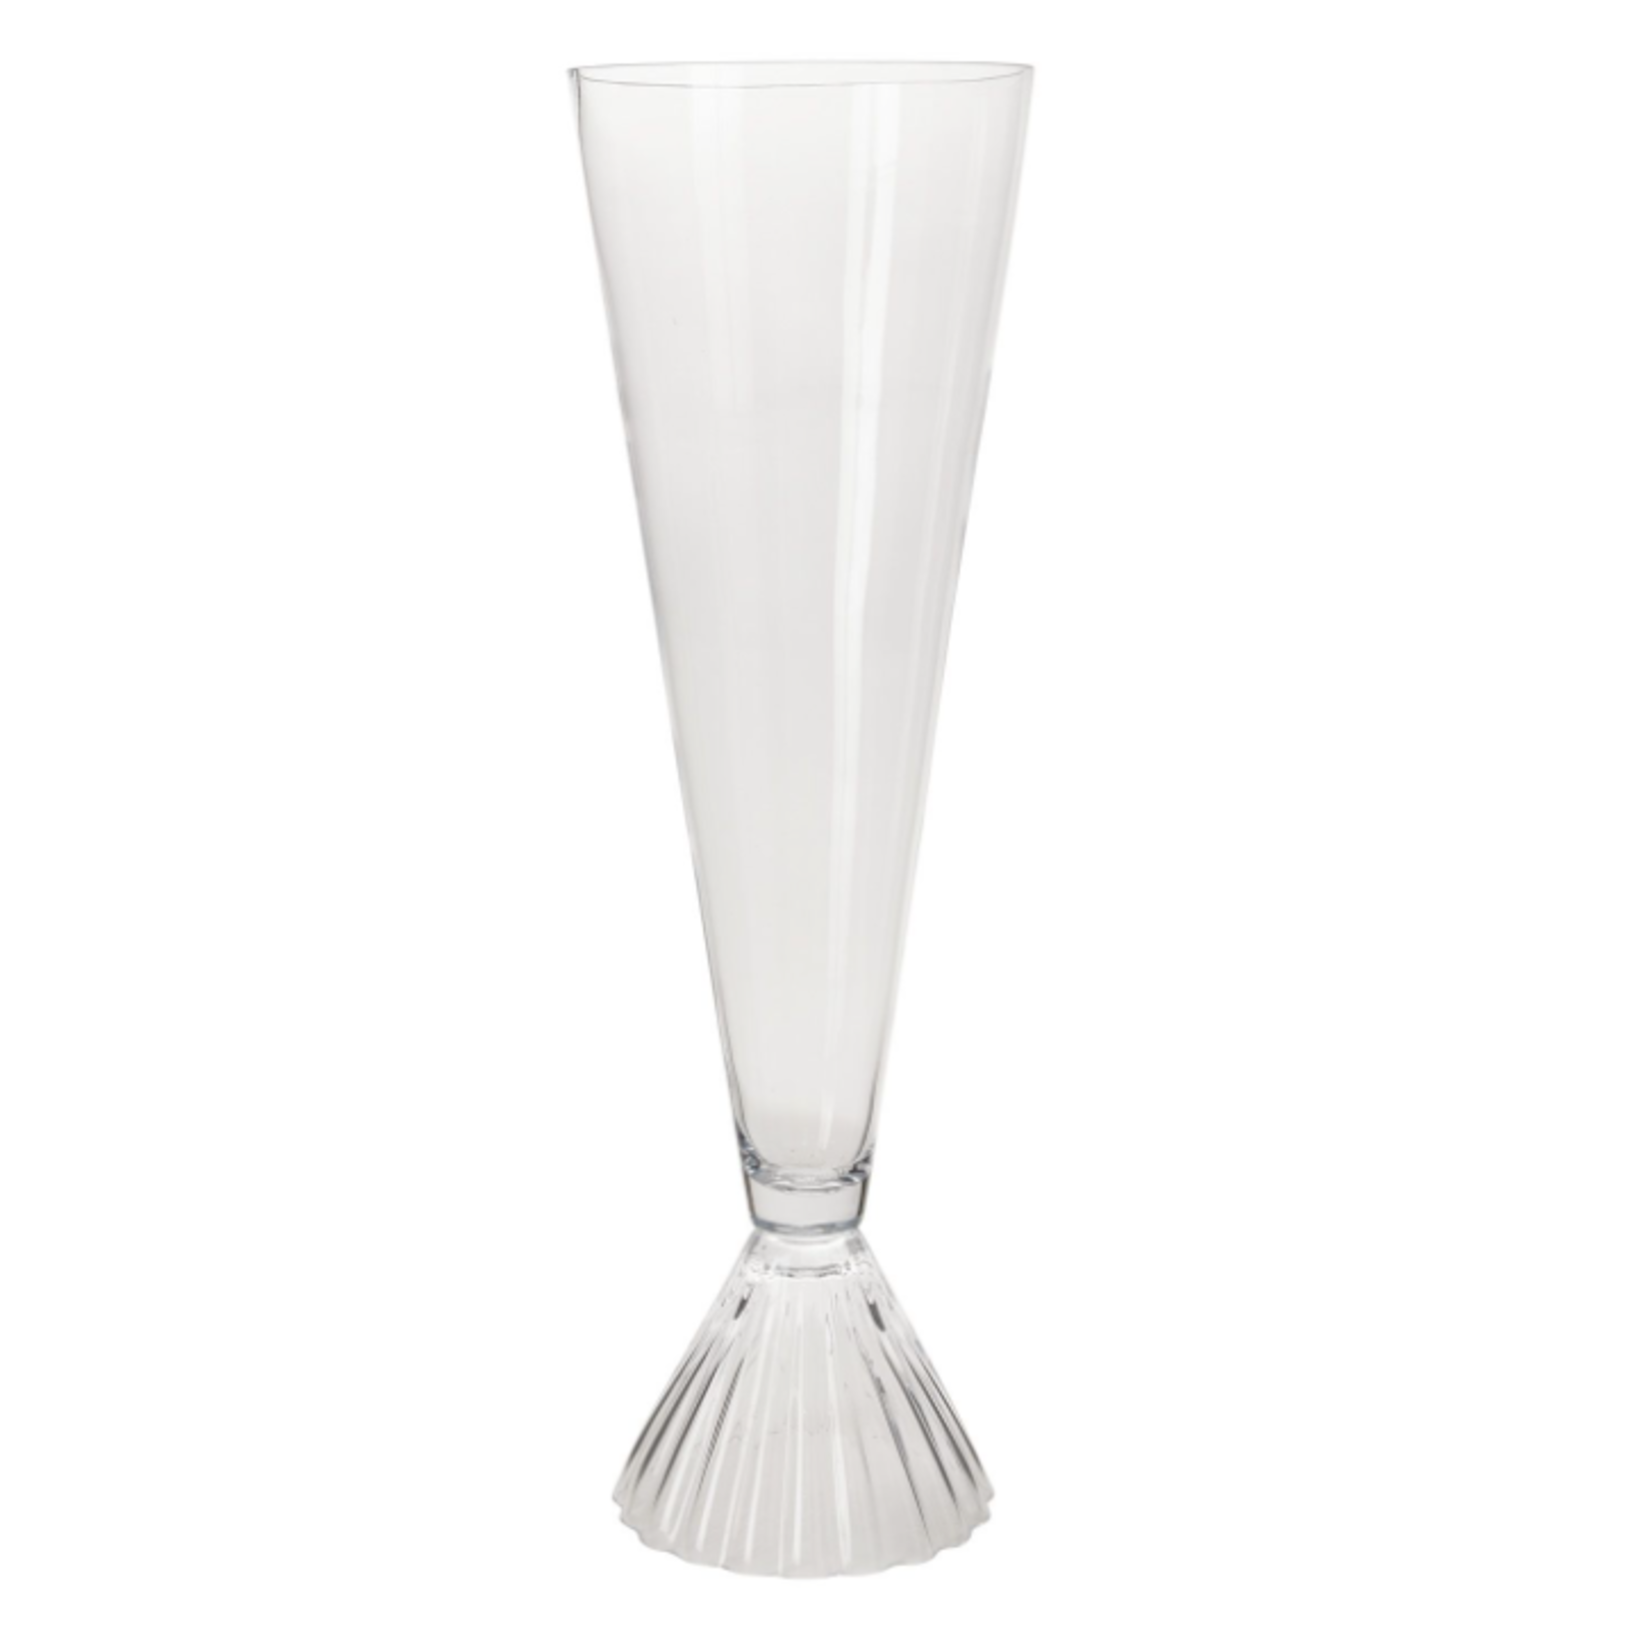 40% off was $170 now $101.99. 31.5”H X 9.5” GLASS SEMPLICE VASE REVERSIBLE